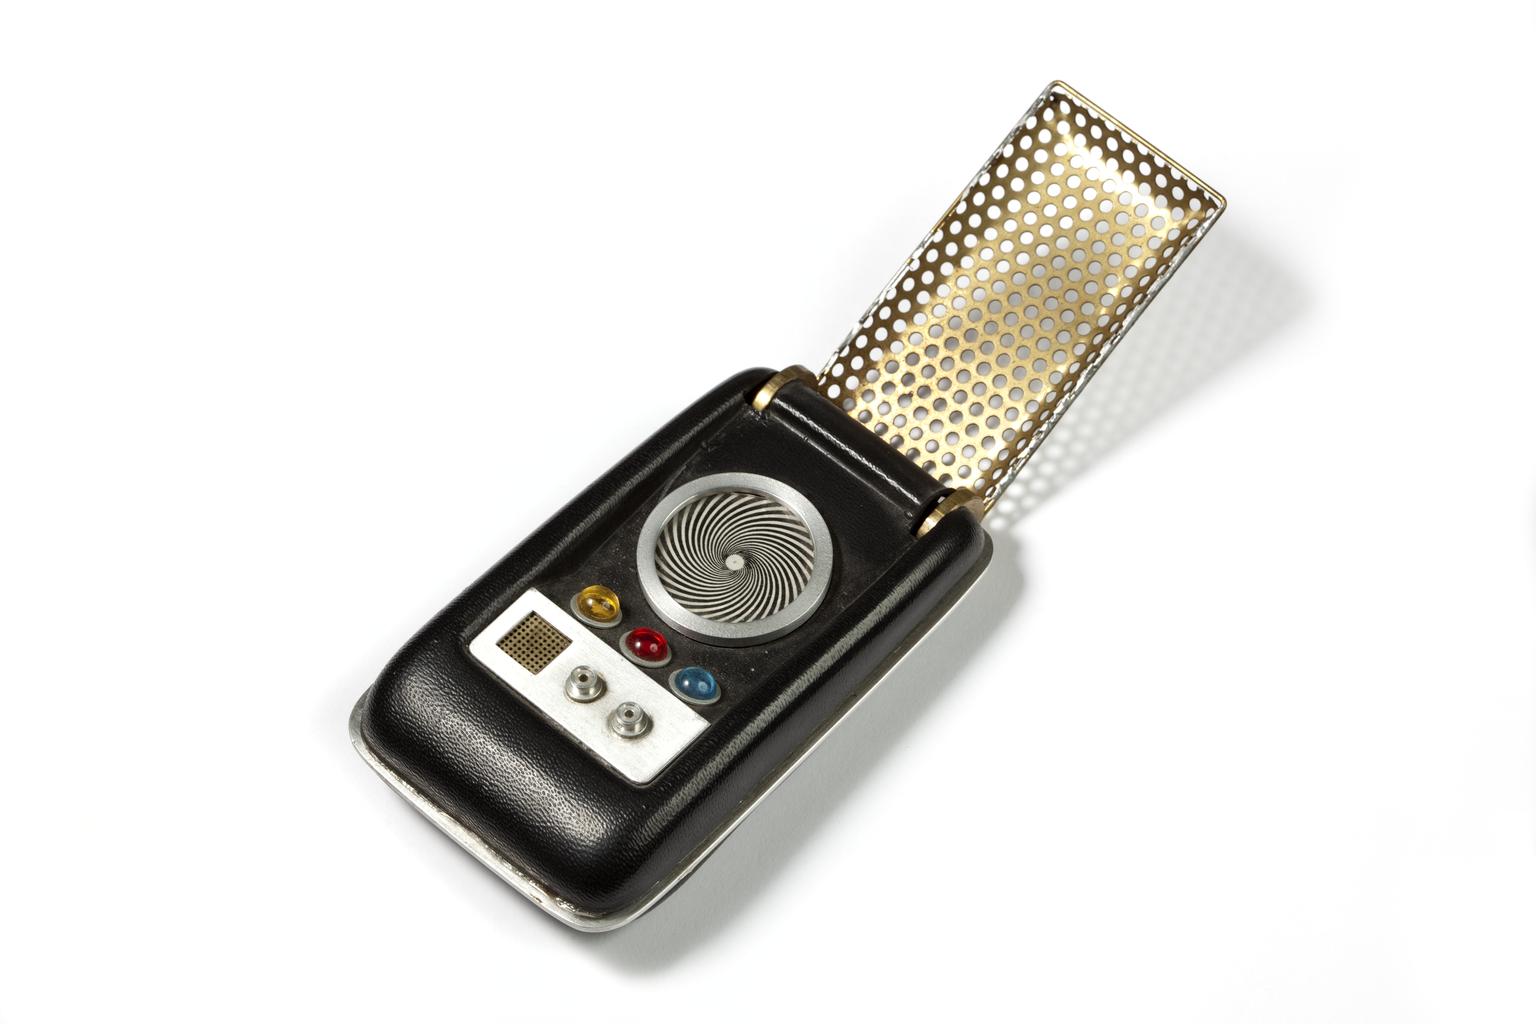 Toy of Captain Kirk's Communicator, modelled on that from the original TV series Star Trek, from the Science Museum Group Collection